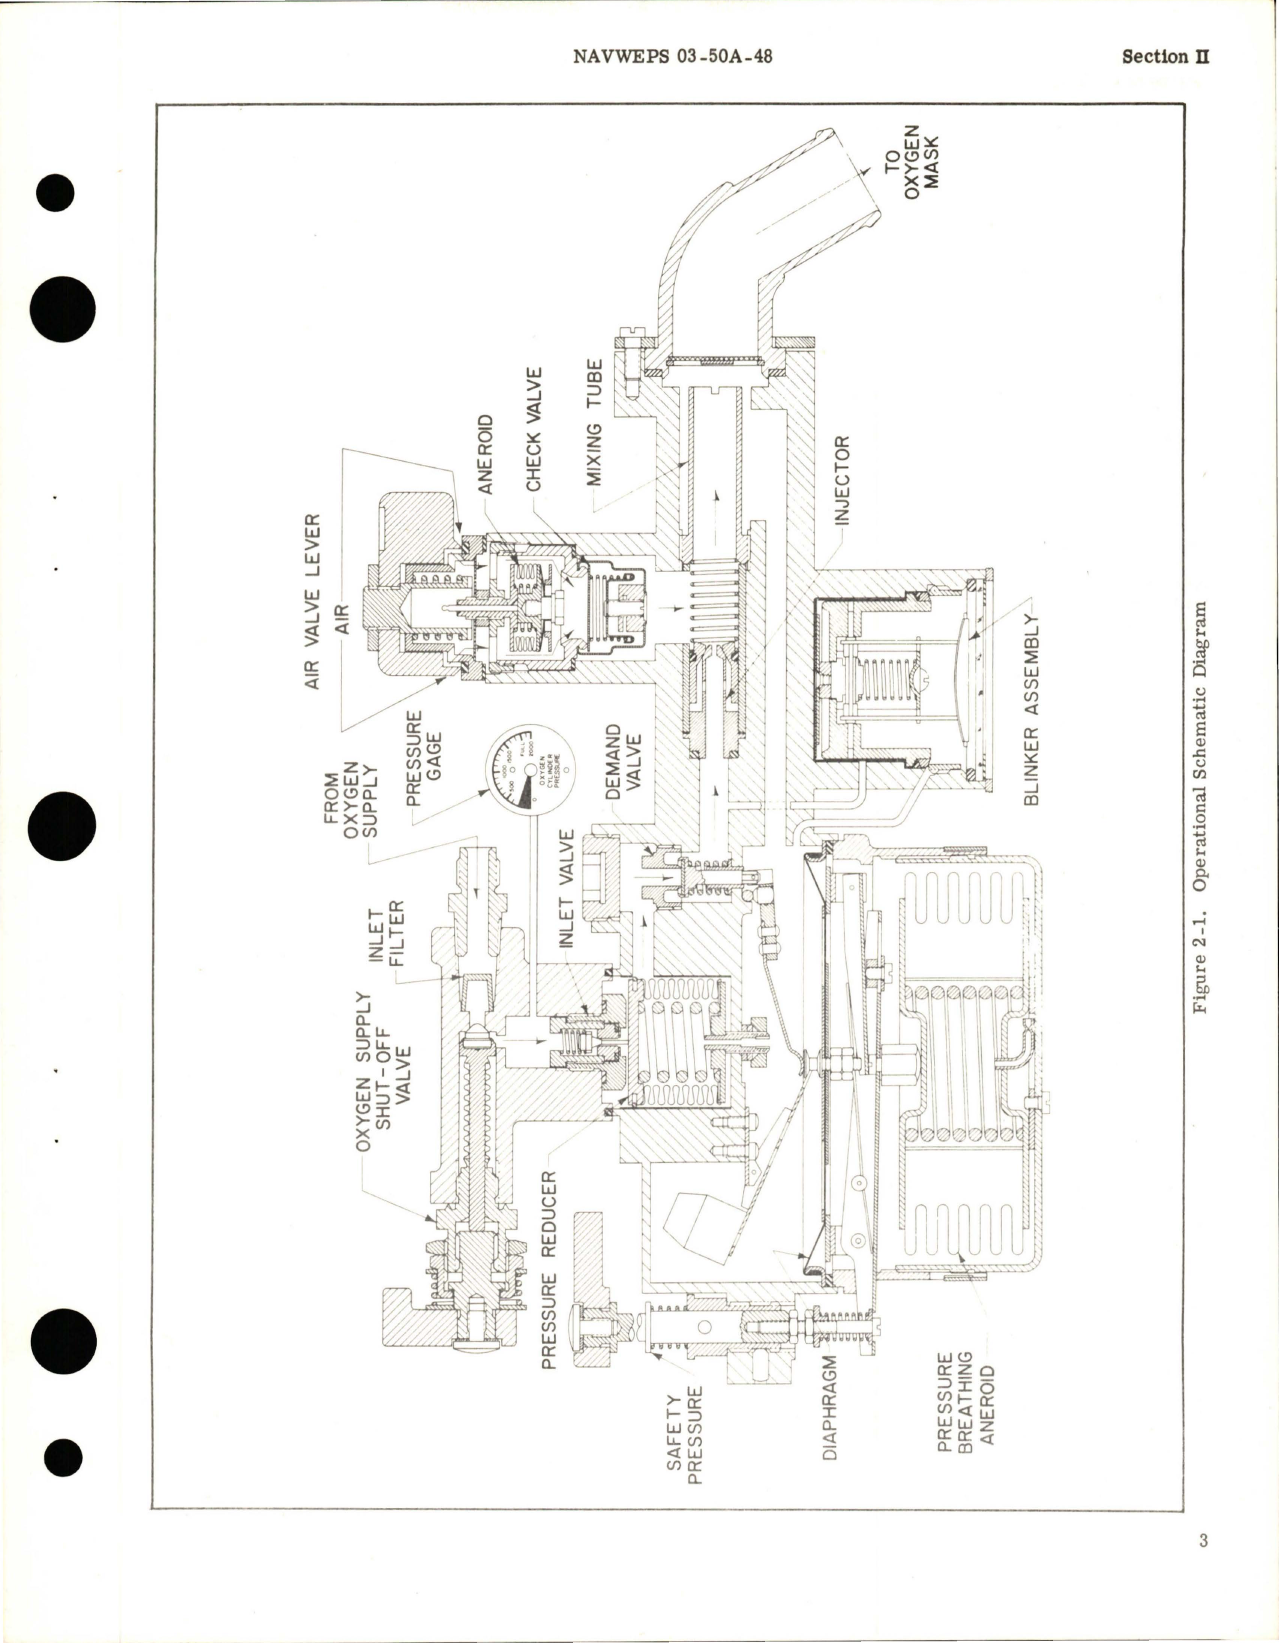 Sample page 7 from AirCorps Library document: Operation, Maintenance, and Overhaul Instructions for Diluter Demand Oxygen Regulator - Part 2867-B2, 2867-7B-C1, 2872-B2, 2873-B32, and 2874-B2